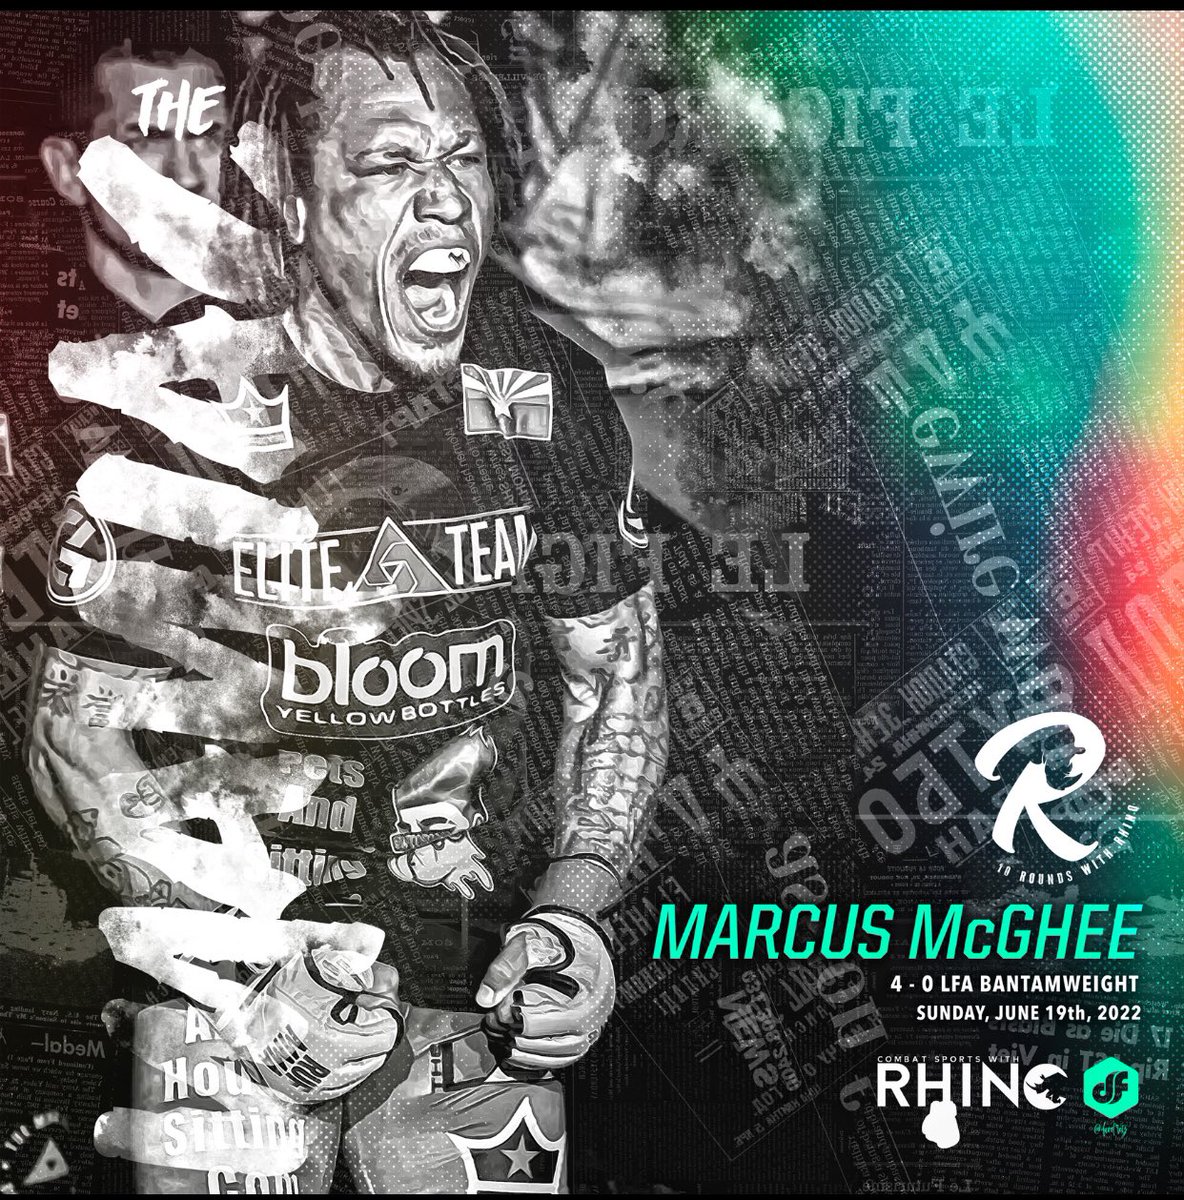 Happy Thursday #MMATwitter If you haven’t yet ✅ out Ep 131 for our full #UFCAustin recap, @apbrocks & my Dotn, picks for #UFCVegas57 Q&A sesh w the 🦏Gang then @LFAfighting @ManiacMcGhee07 goes 10rds w Rhino! Artwork @davefretz #MMA open.spotify.com/episode/5VwbZN…